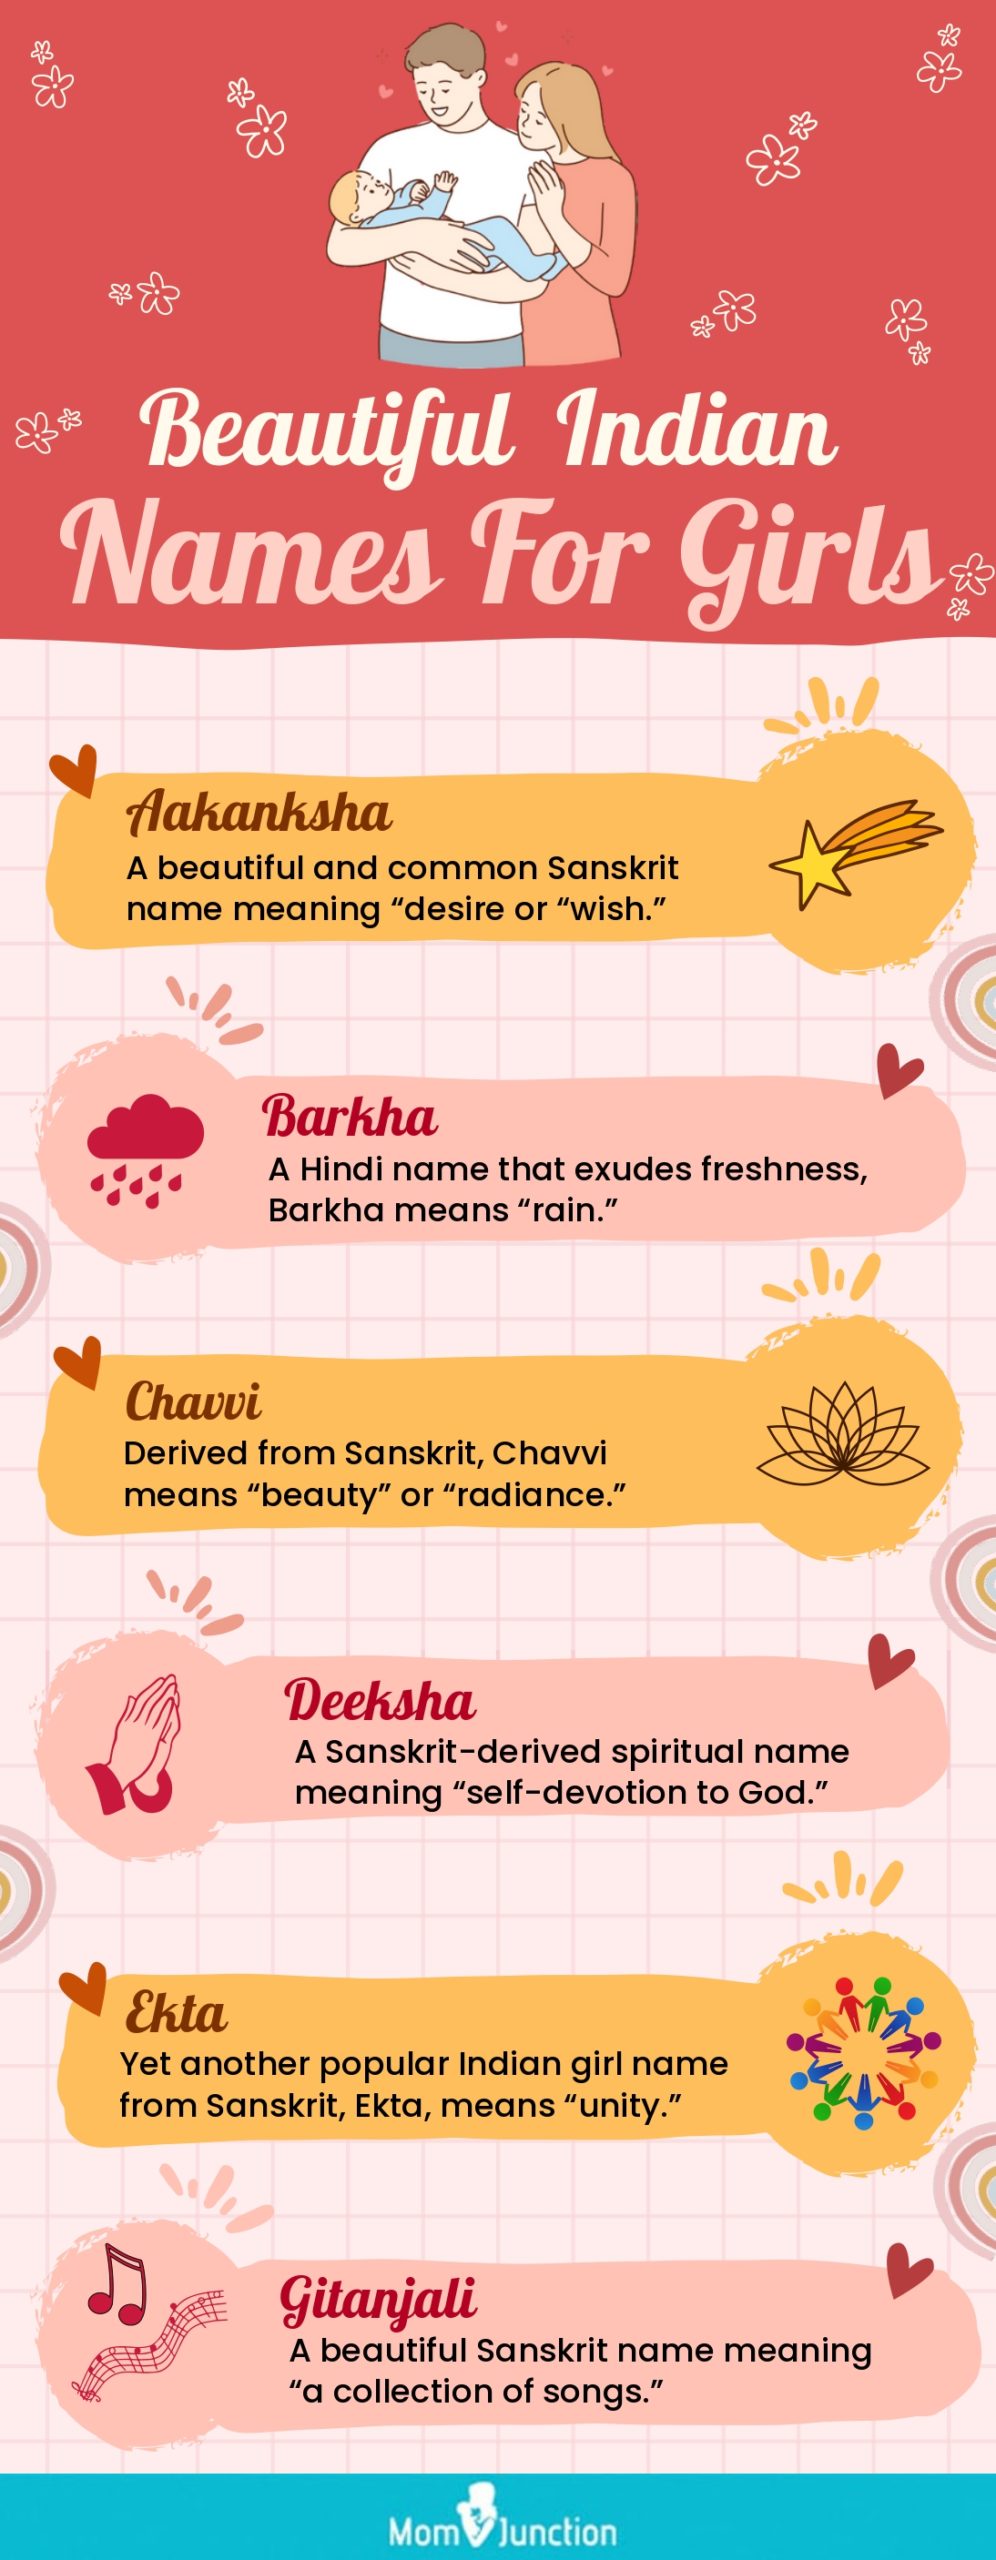 beautiful indian names for girls (infographic)